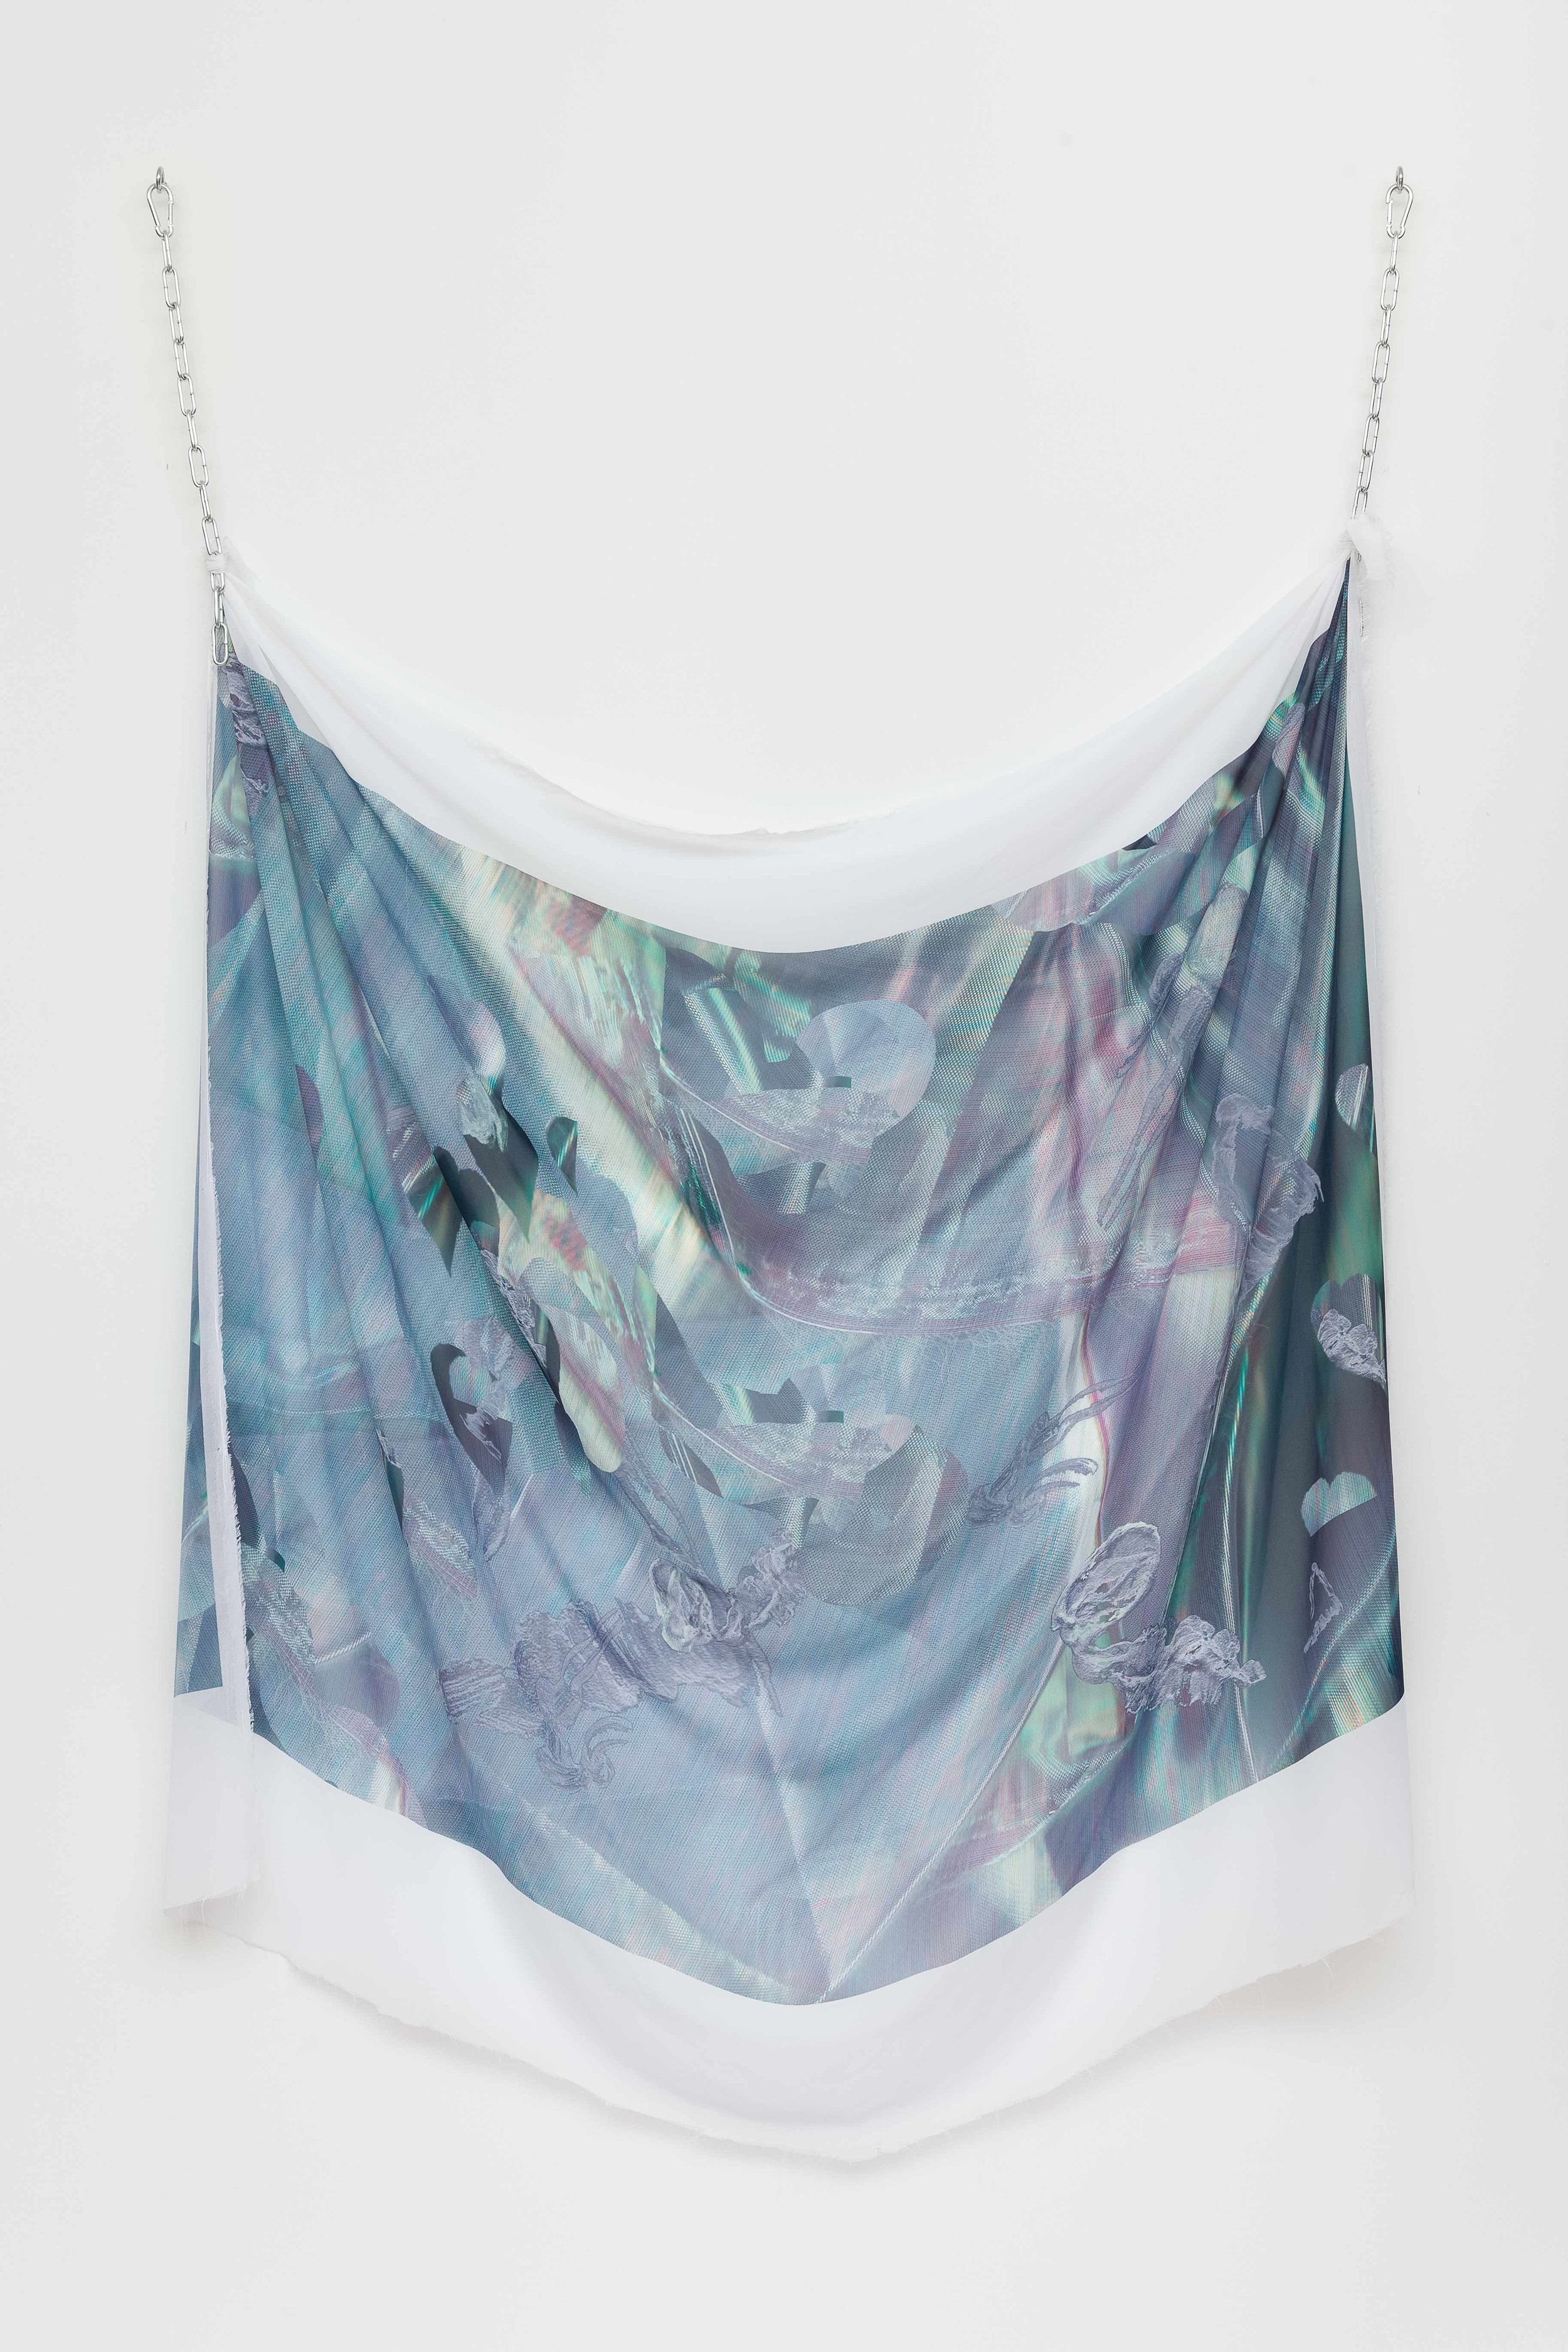   Interference , digital print on chiffon, iridescent paint and metal chains, 160 x 145cm  Photo: Docqment   Enquire  